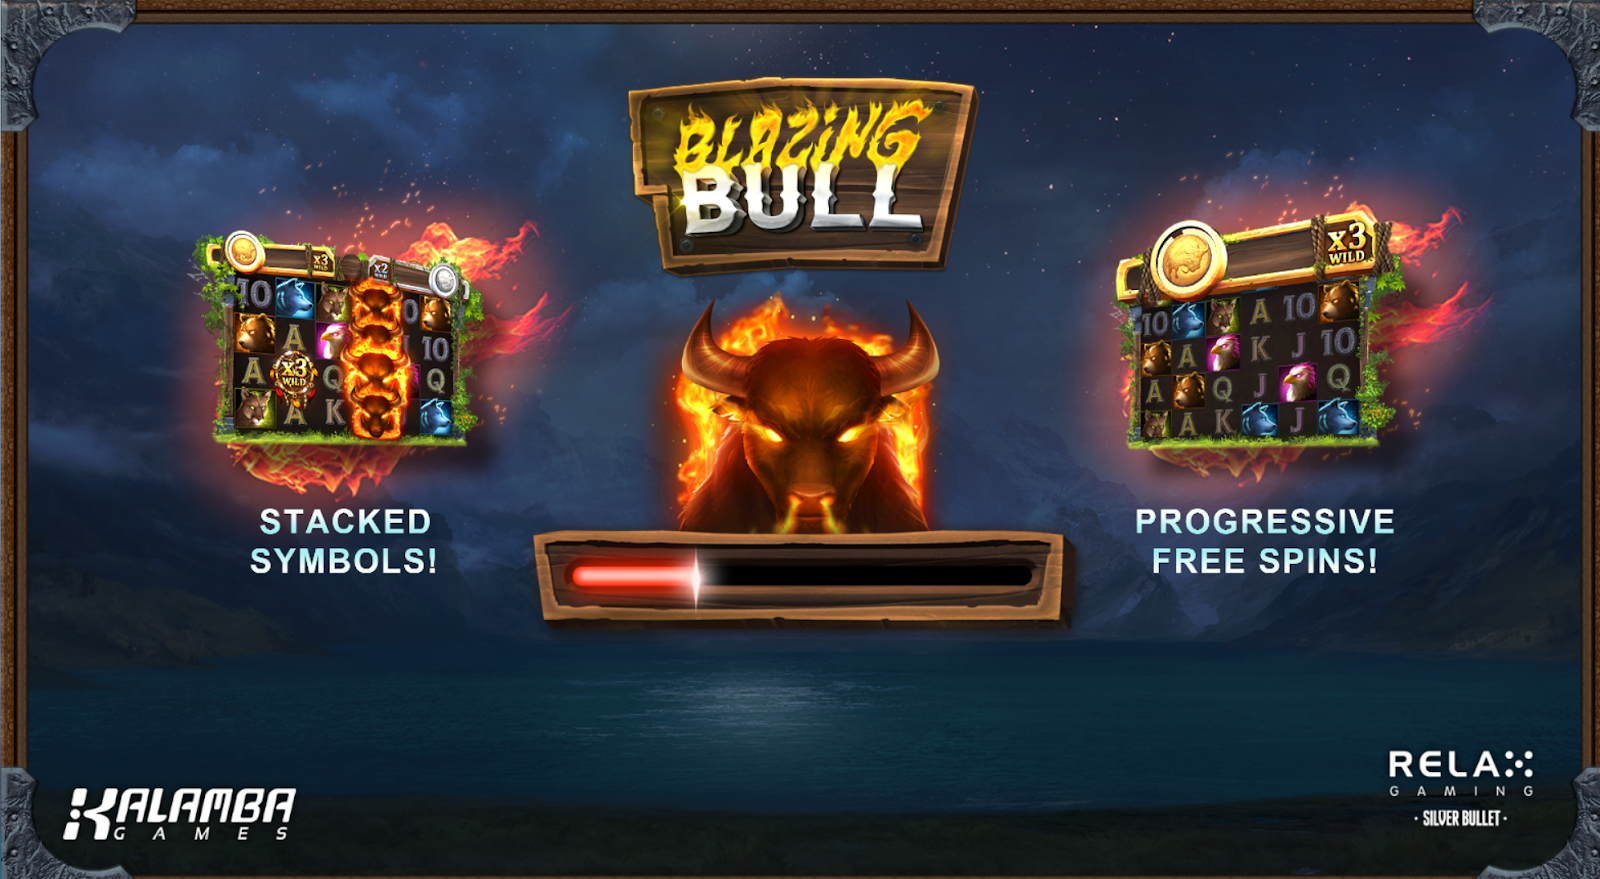 Blazing Bull is a great slot game that you can play at Casoola Casino 